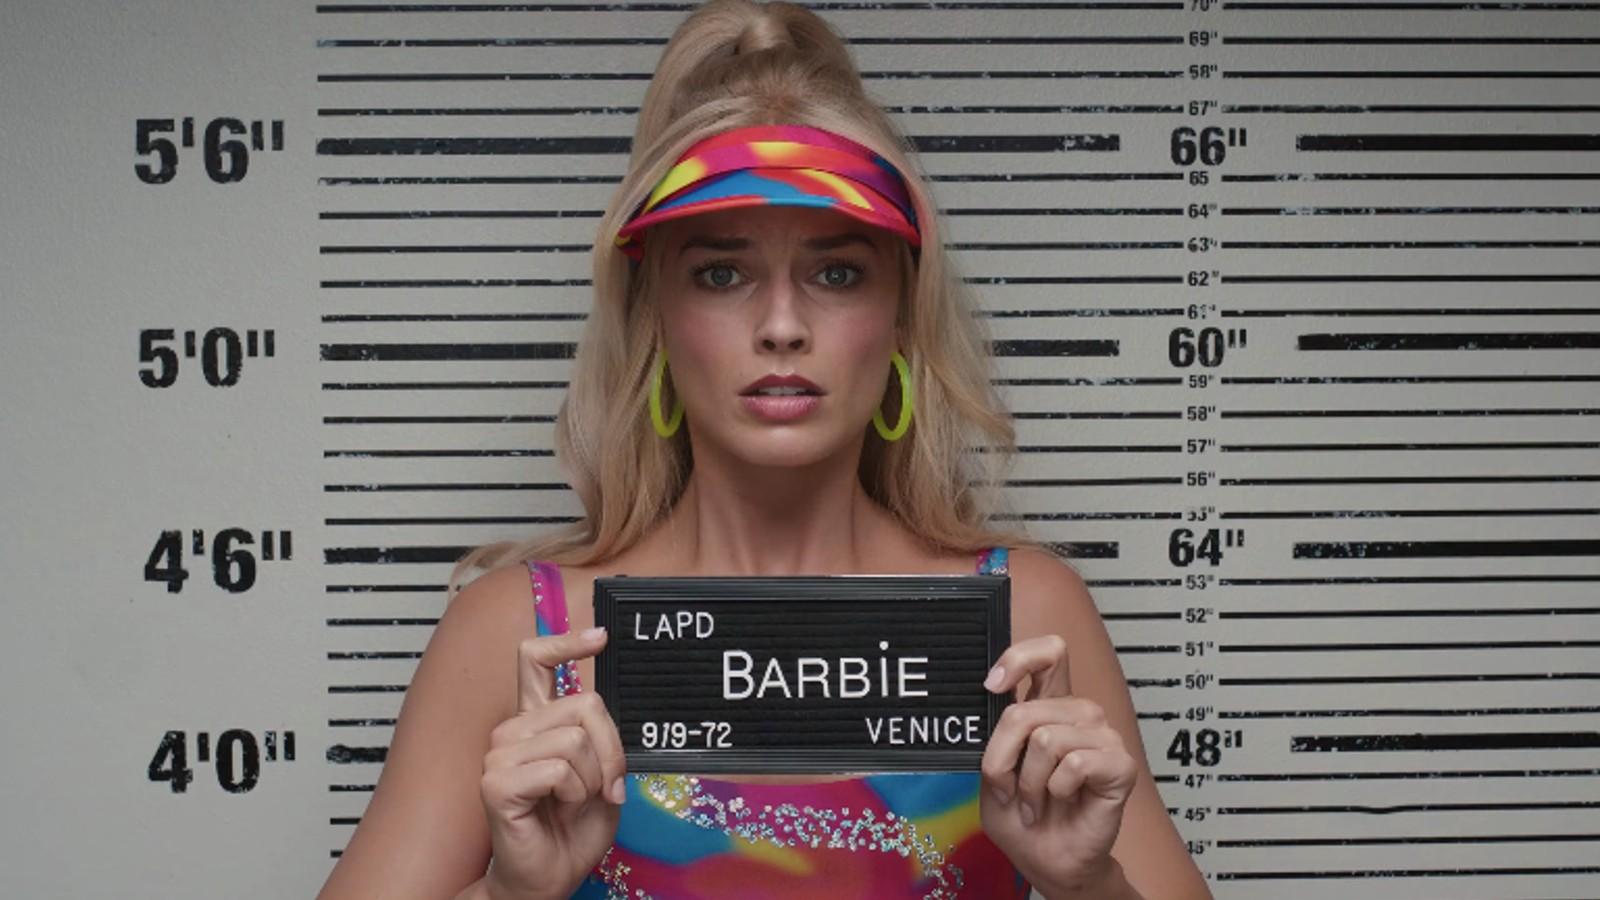 Barbie poses for her mugshot in the Barbie movie